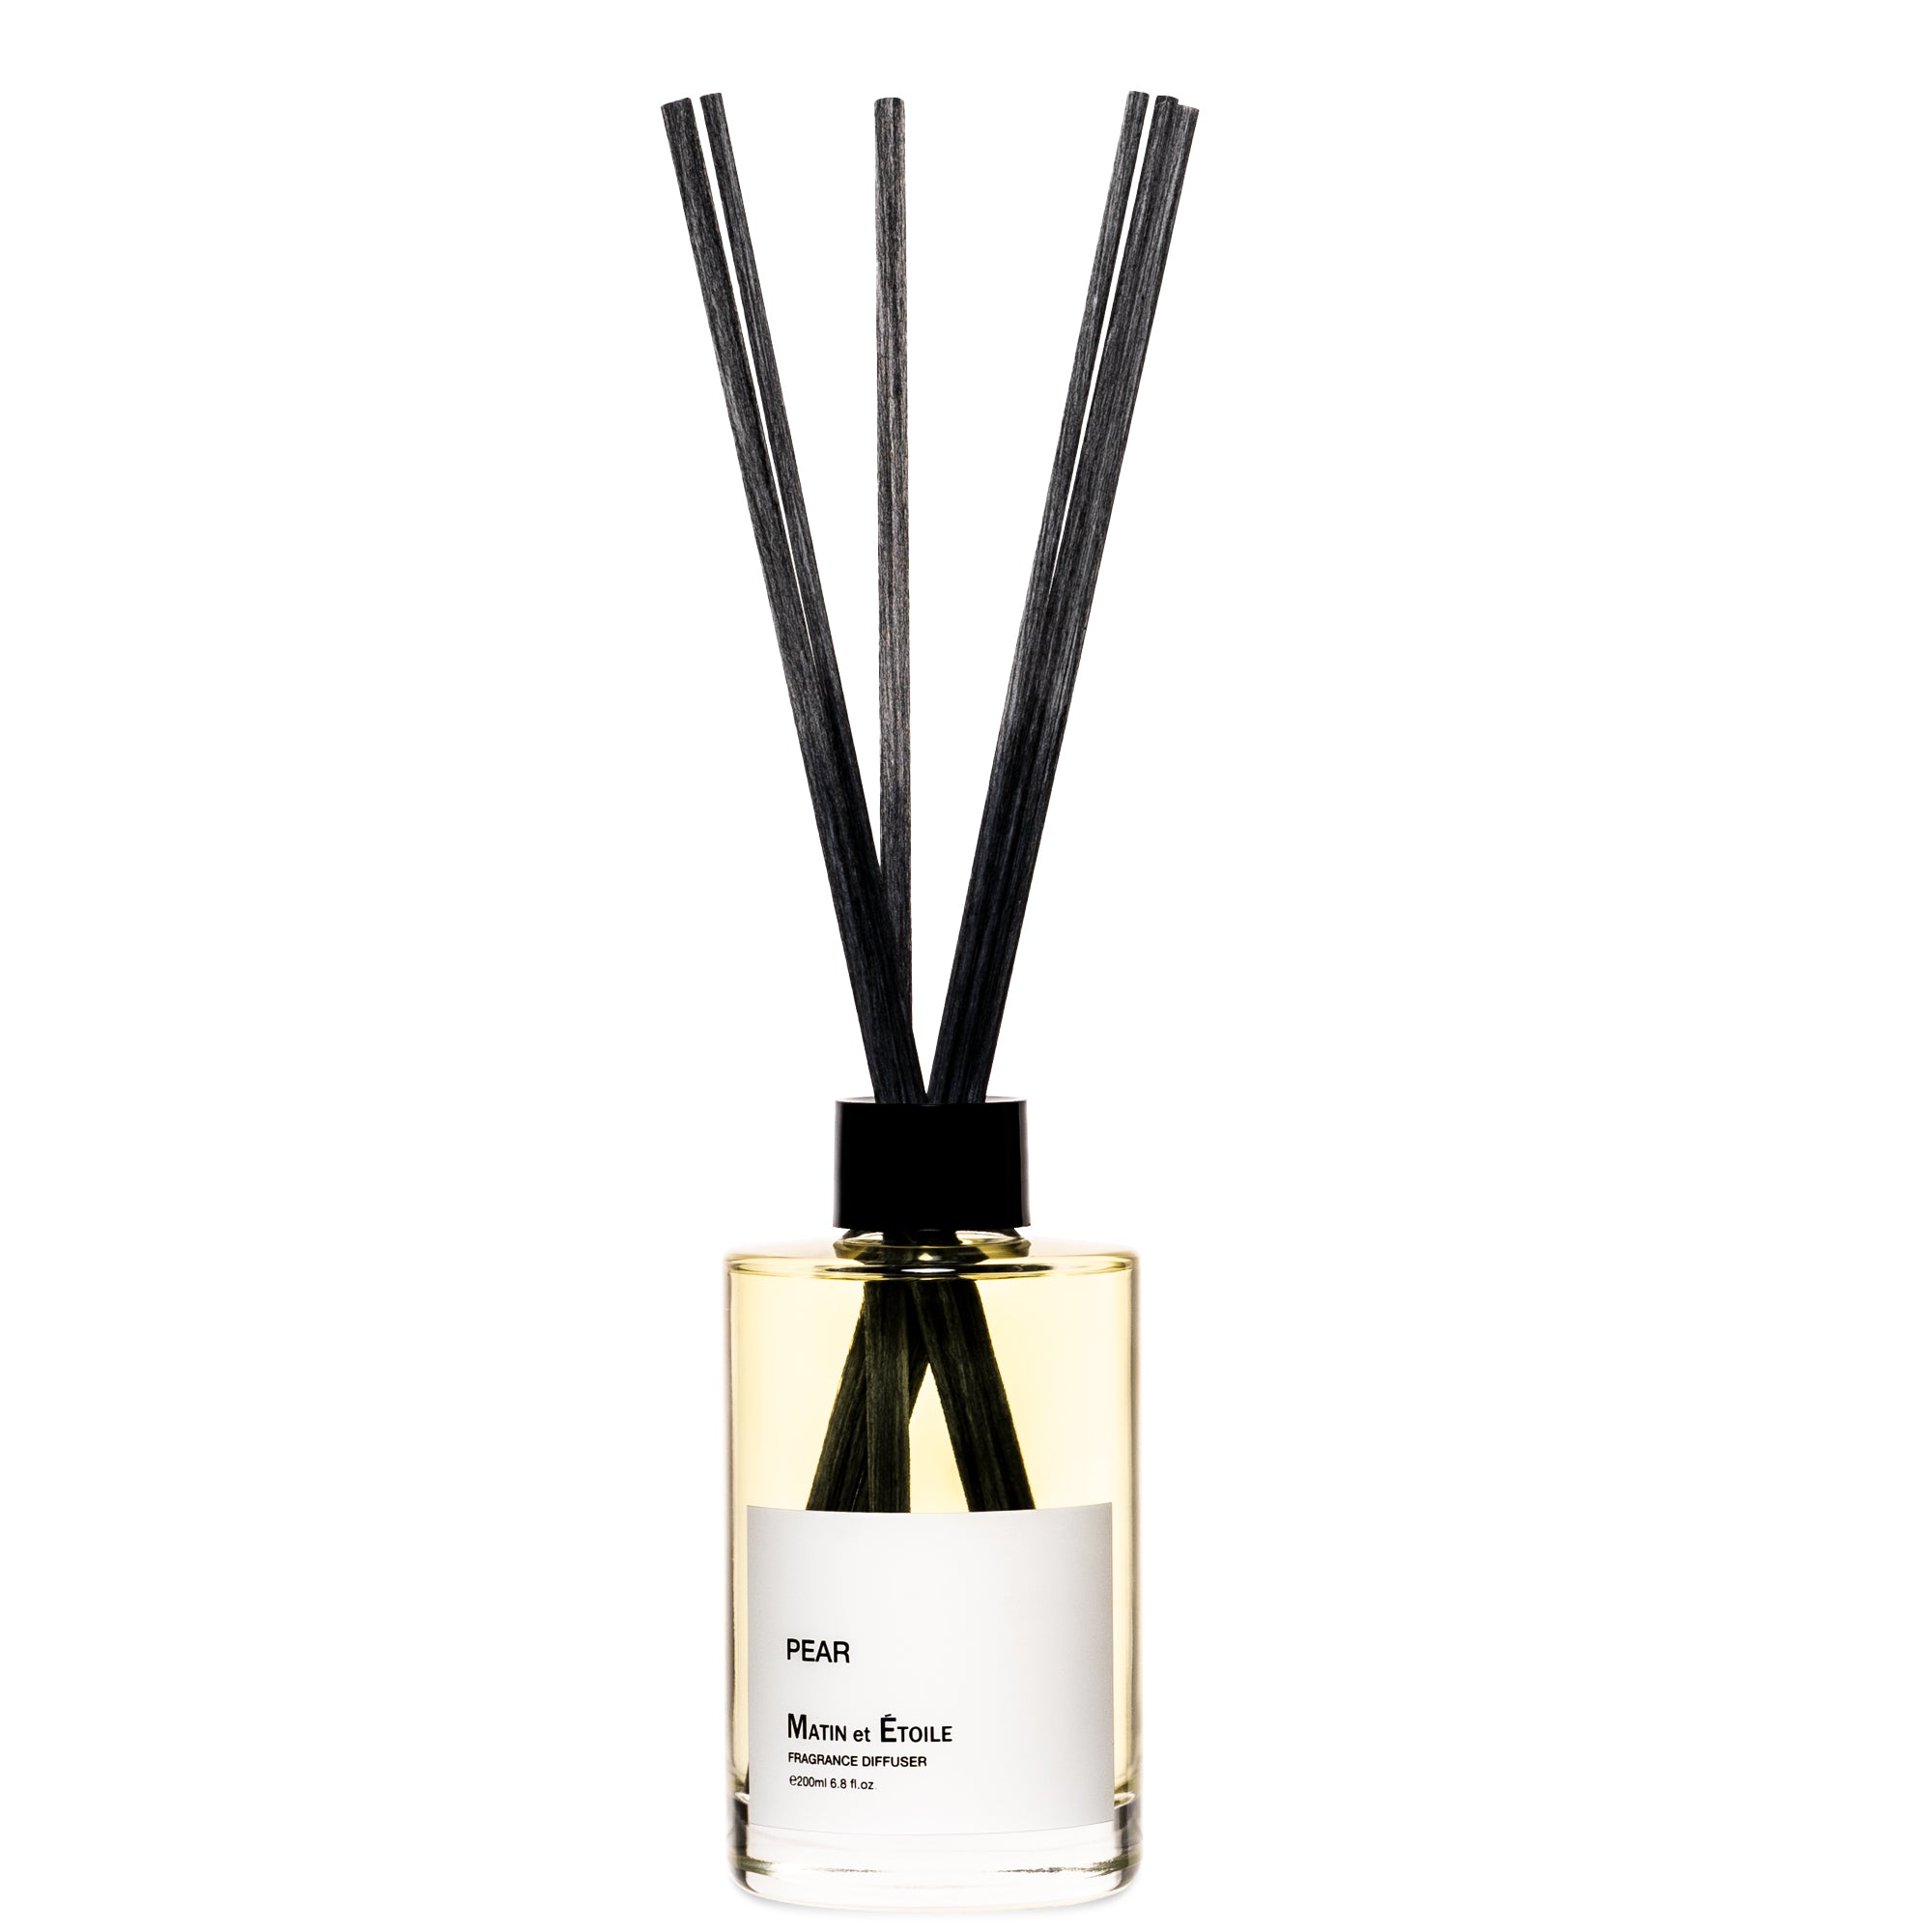 FRAGRANCE REED DIFFUSER - PEAR – MATIN et ETOILE